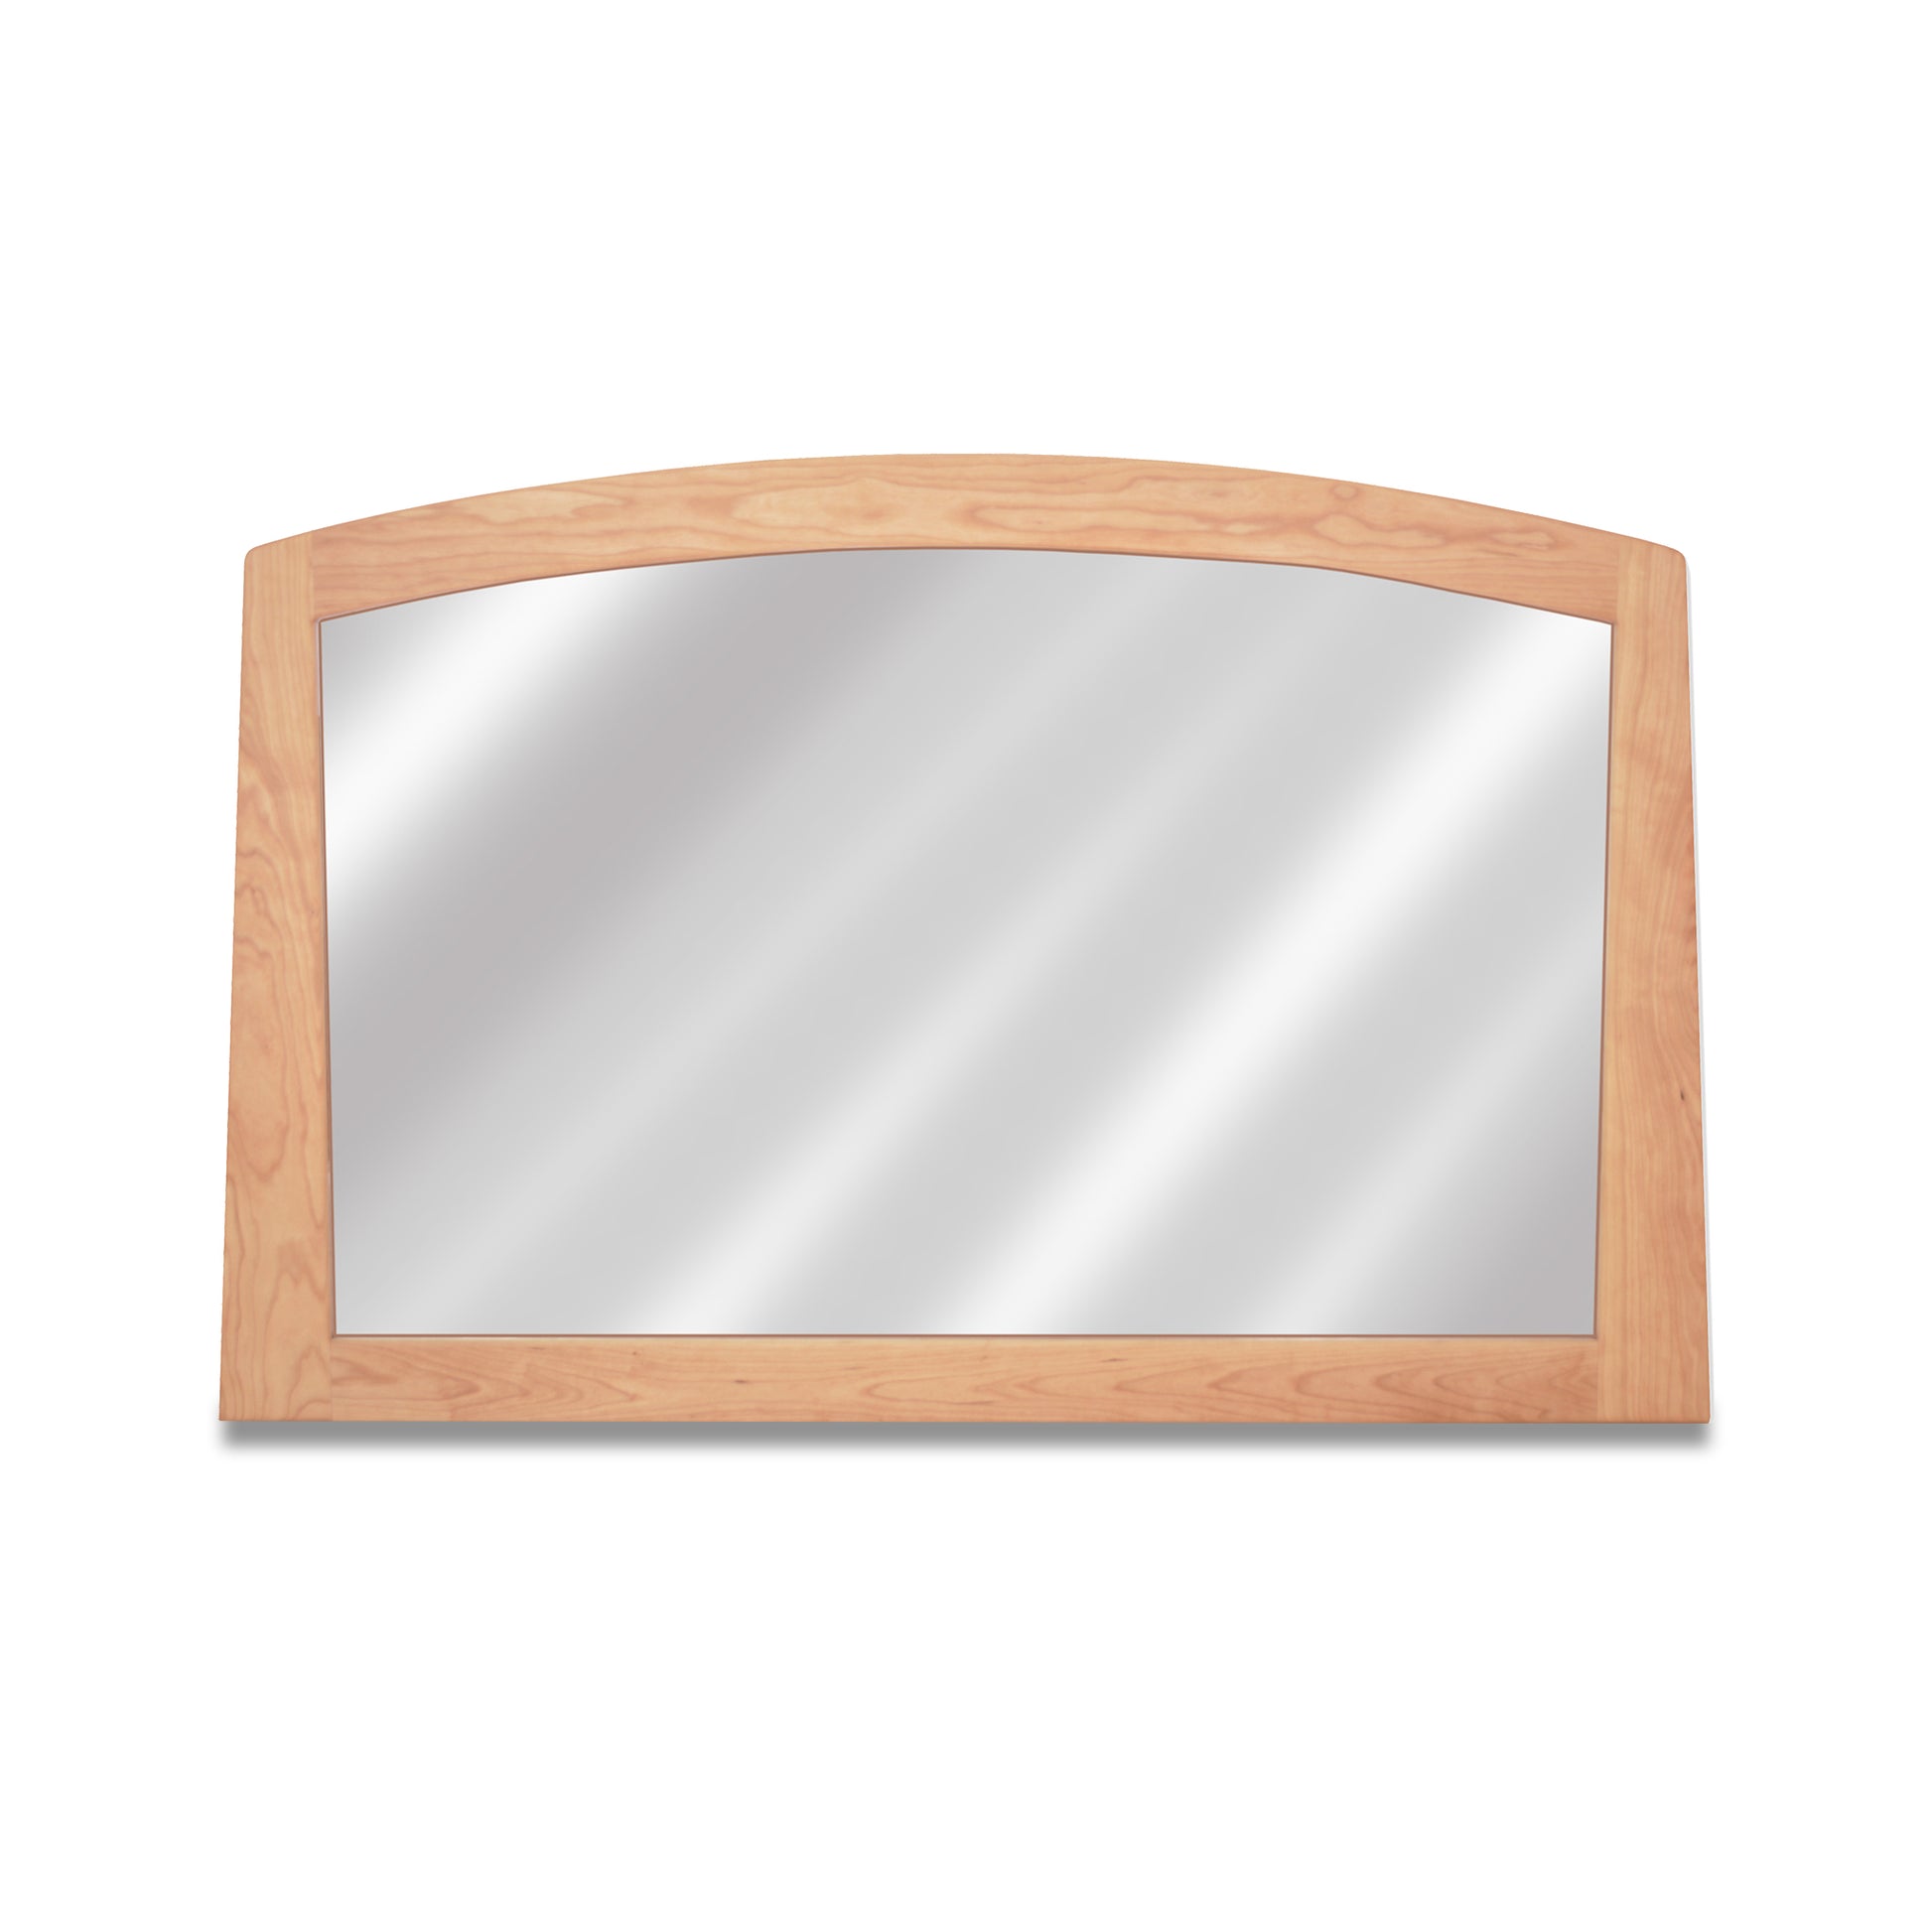 A sustainably harvested solid wood-framed Cherry Moon Horizontal Mirror with an arched top isolated on a white background by Maple Corner Woodworks.